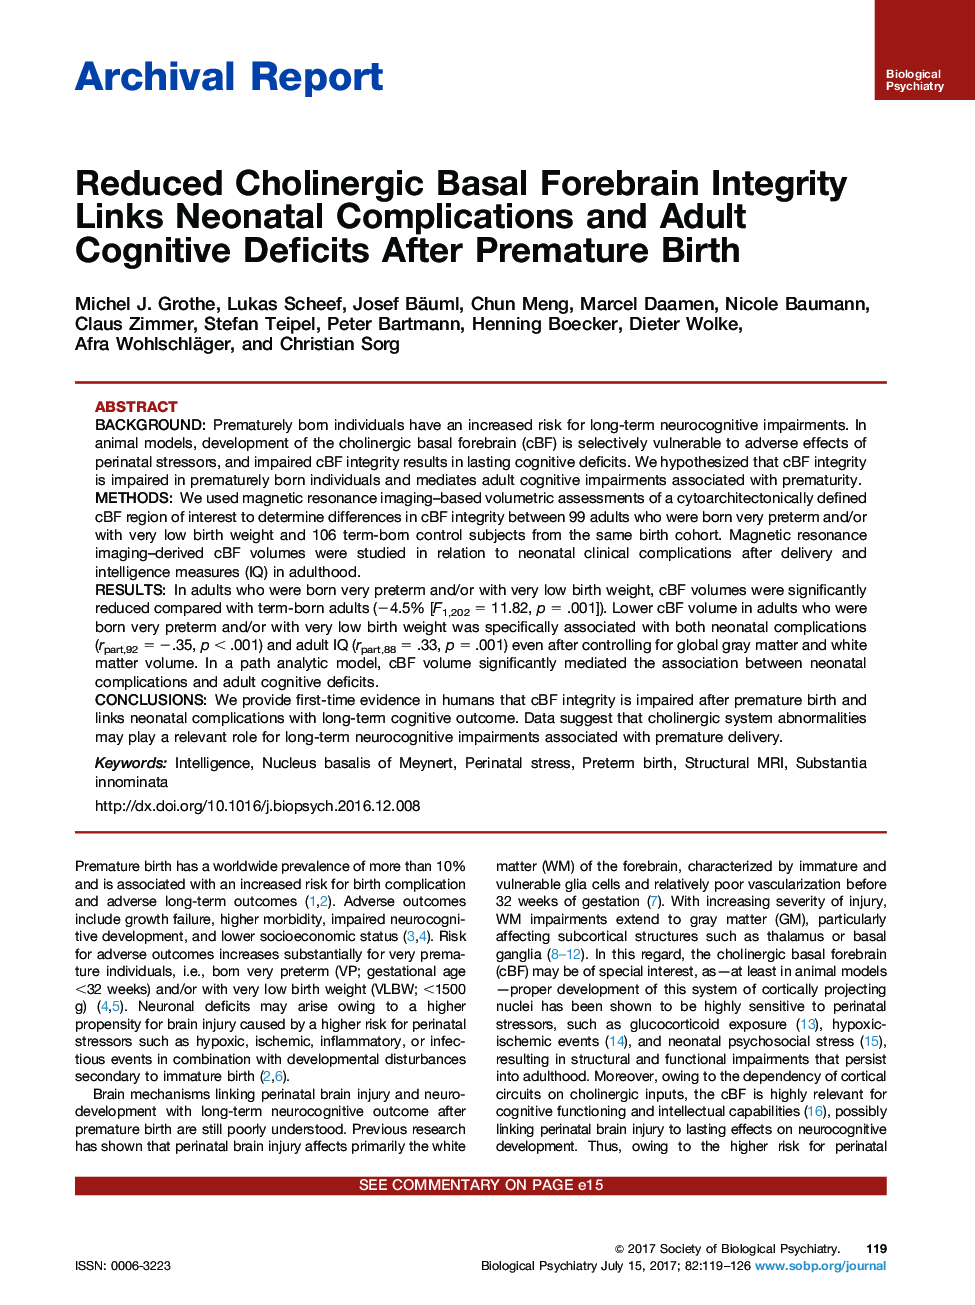 Archival ReportReduced Cholinergic Basal Forebrain Integrity Links Neonatal Complications and Adult Cognitive Deficits After Premature Birth